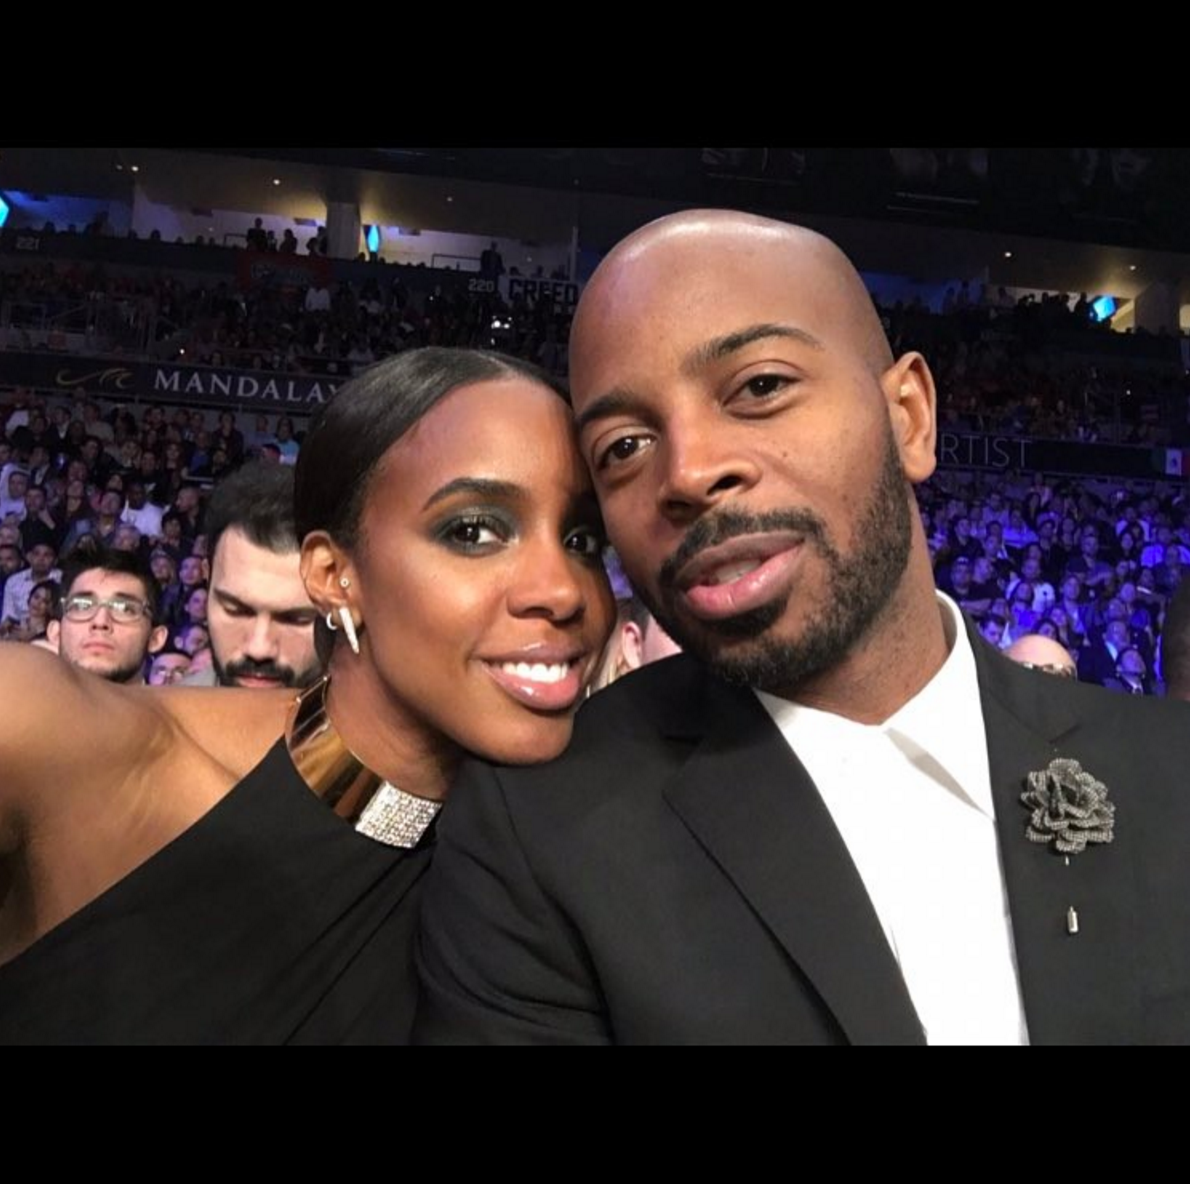 Kelly Rowland And Husband Tim Weatherspoon Celebrate 3rd Wedding Anniversary, Swap Sweet Messages